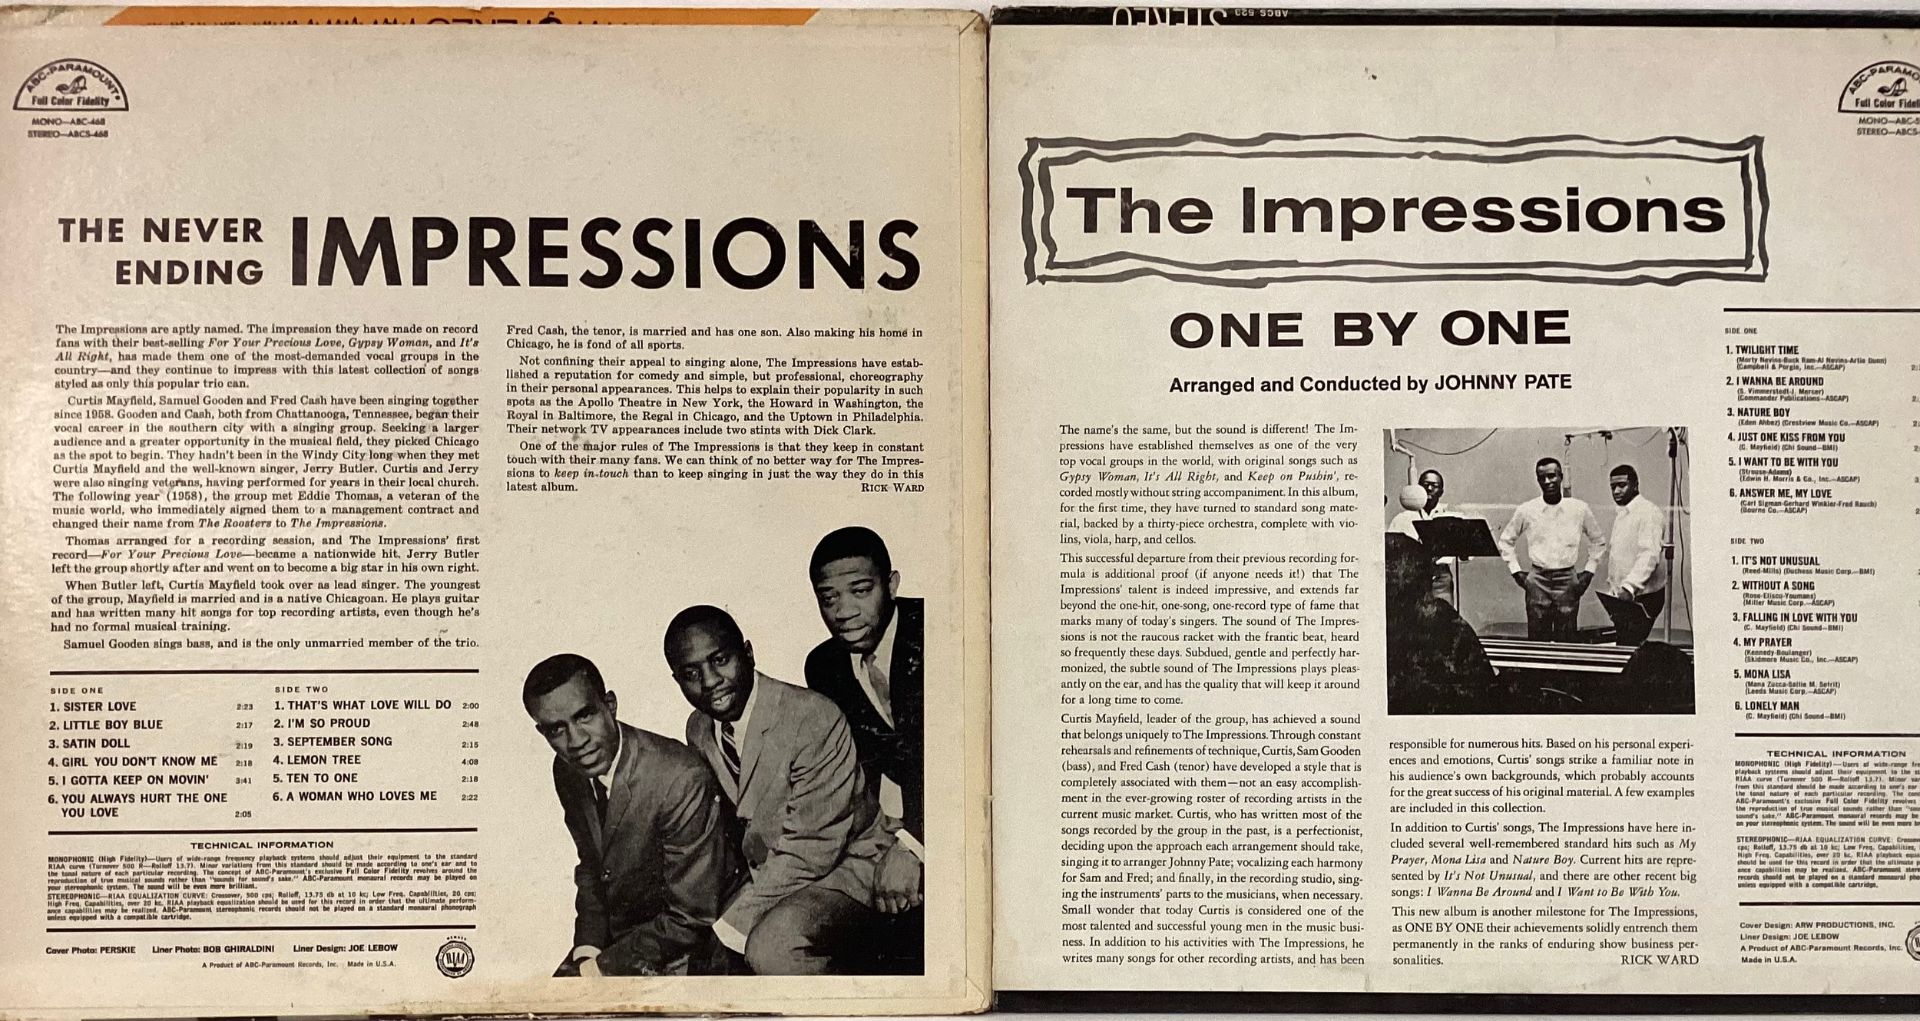 THE IMPRESSIONS VINYL USA ALBUMS X 2. Titles here are ‘The Never Ending’ on ABC Paramount Records - Image 2 of 2